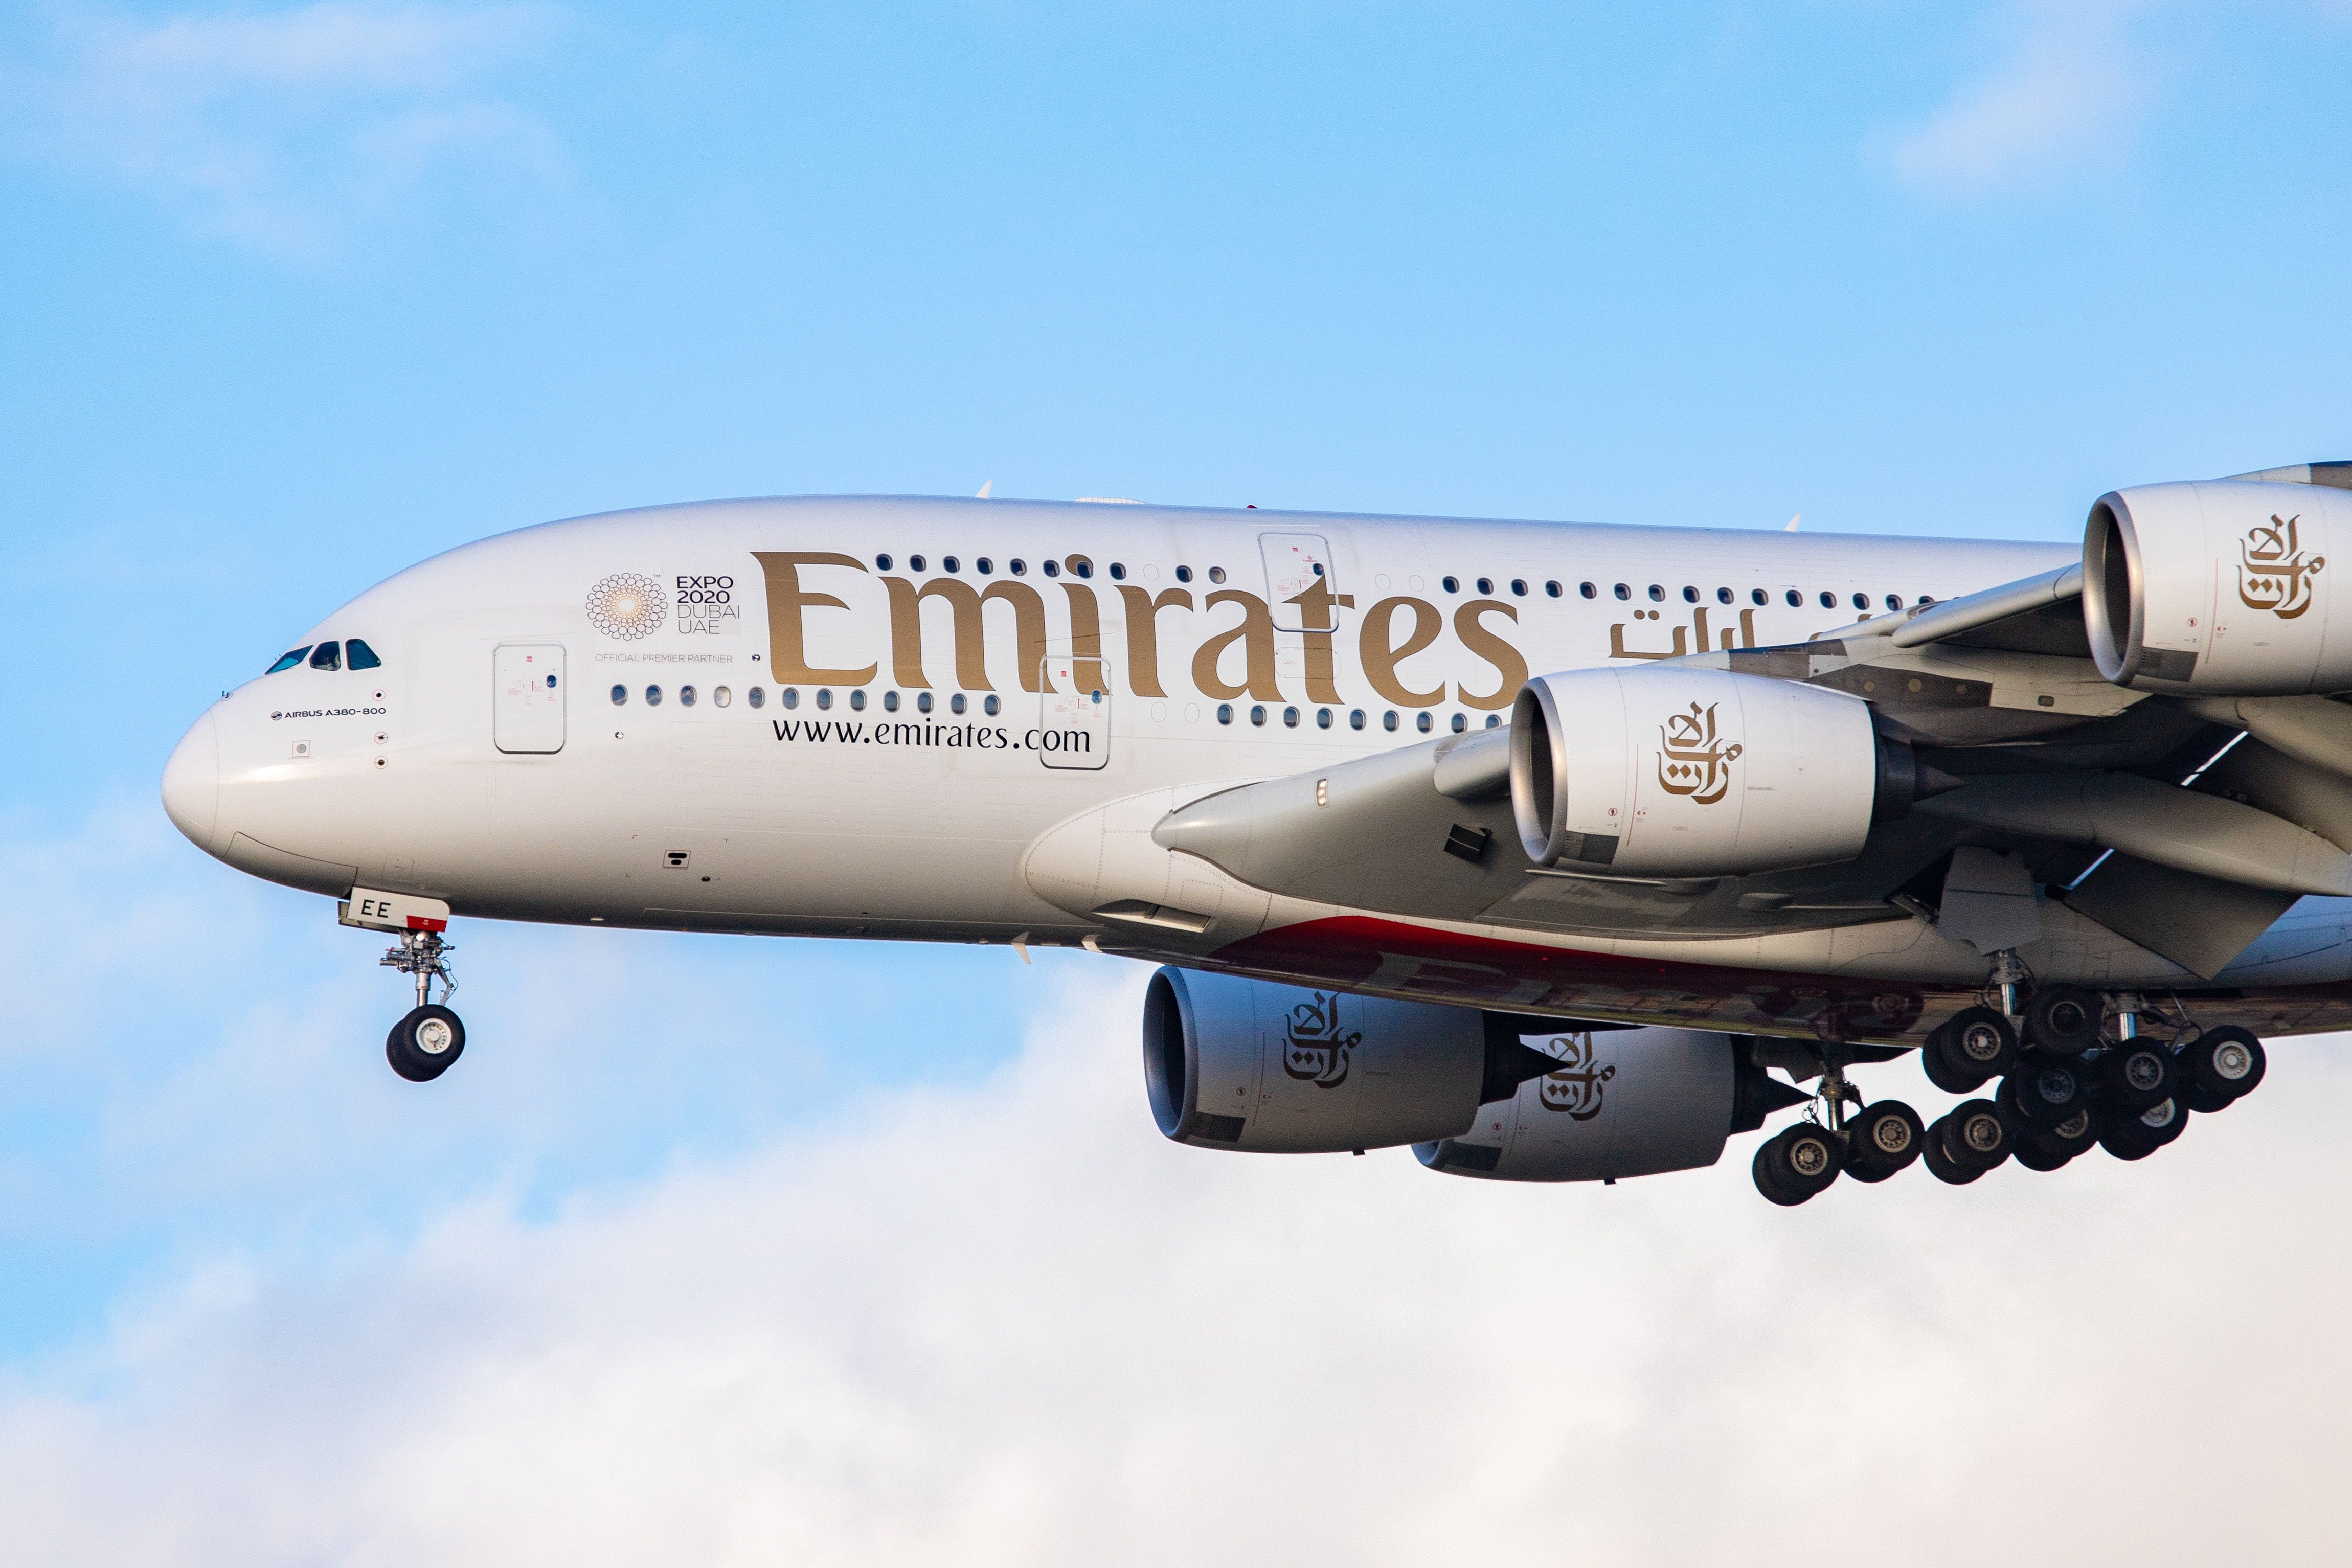 The Emirates A380 has returned to Houston